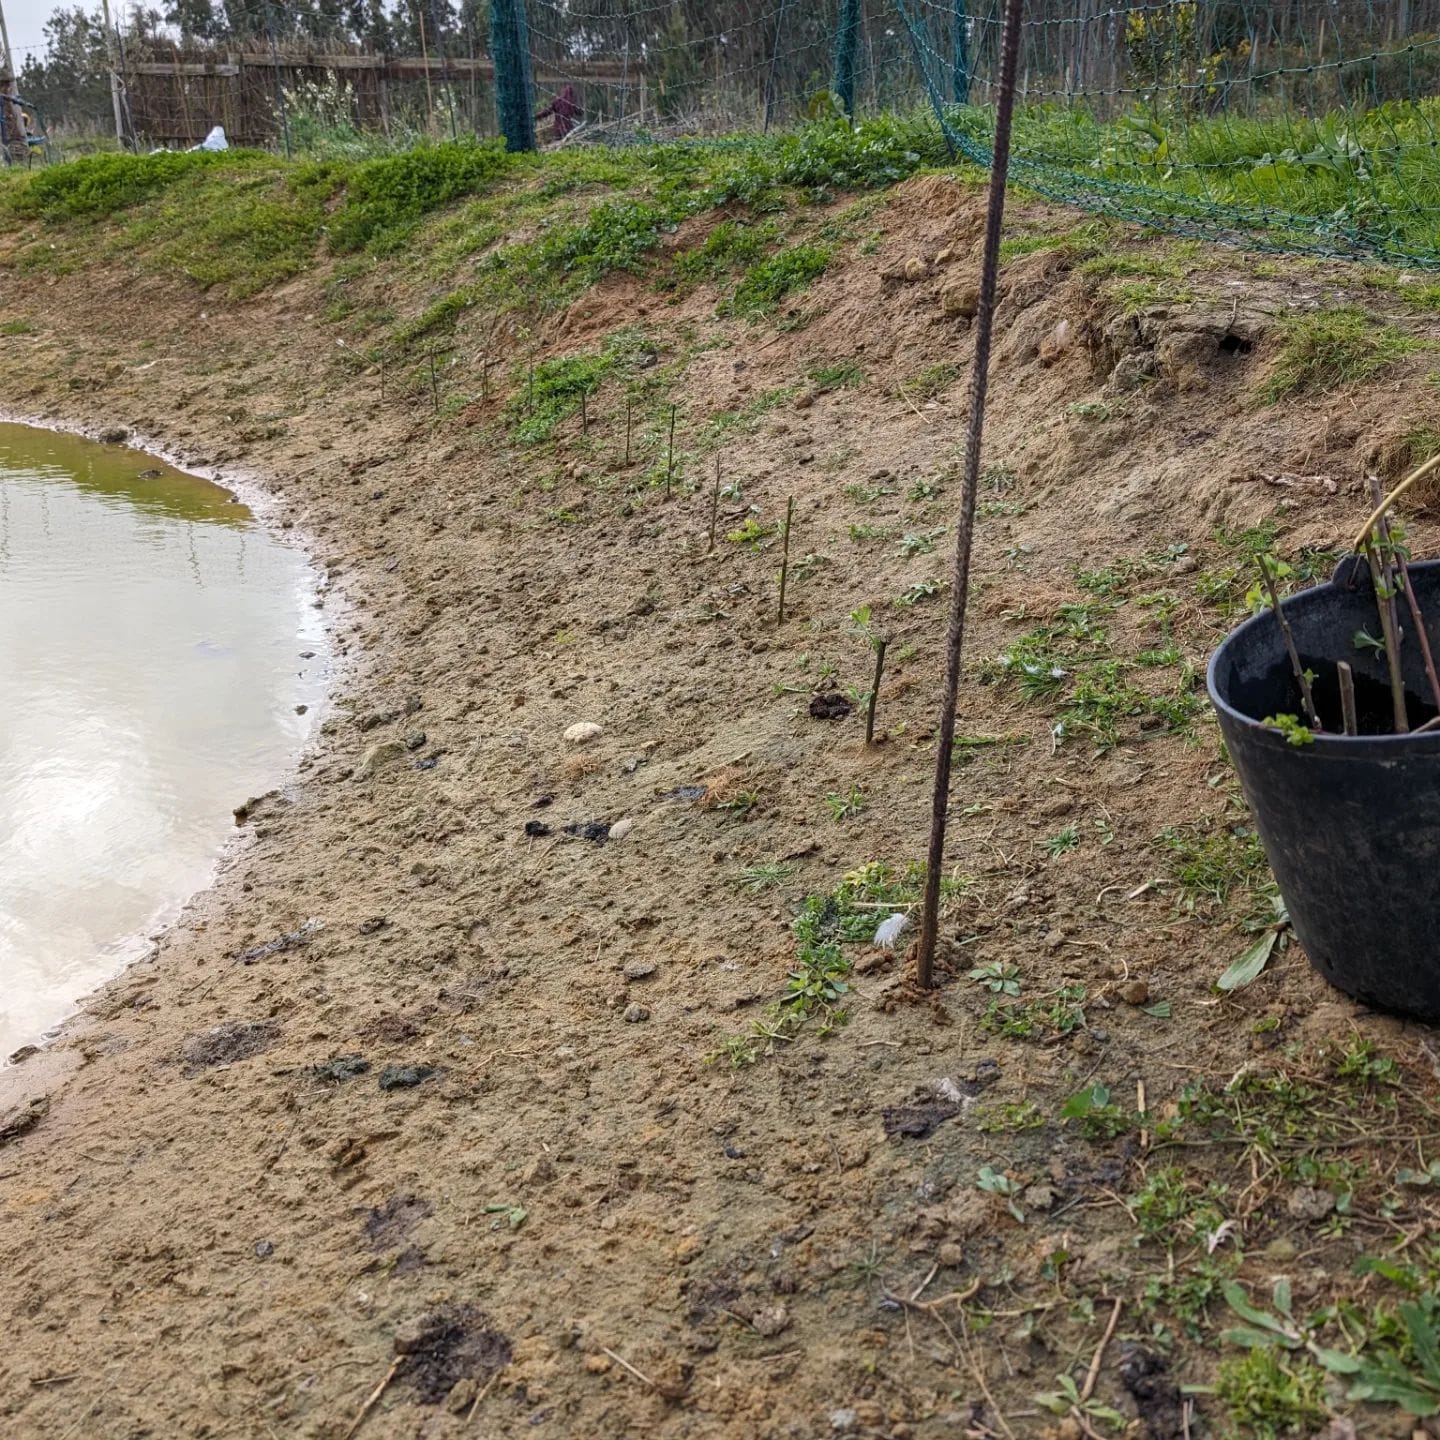 Planted willow, poplar, and plane tree cuttings around the duck pond bank